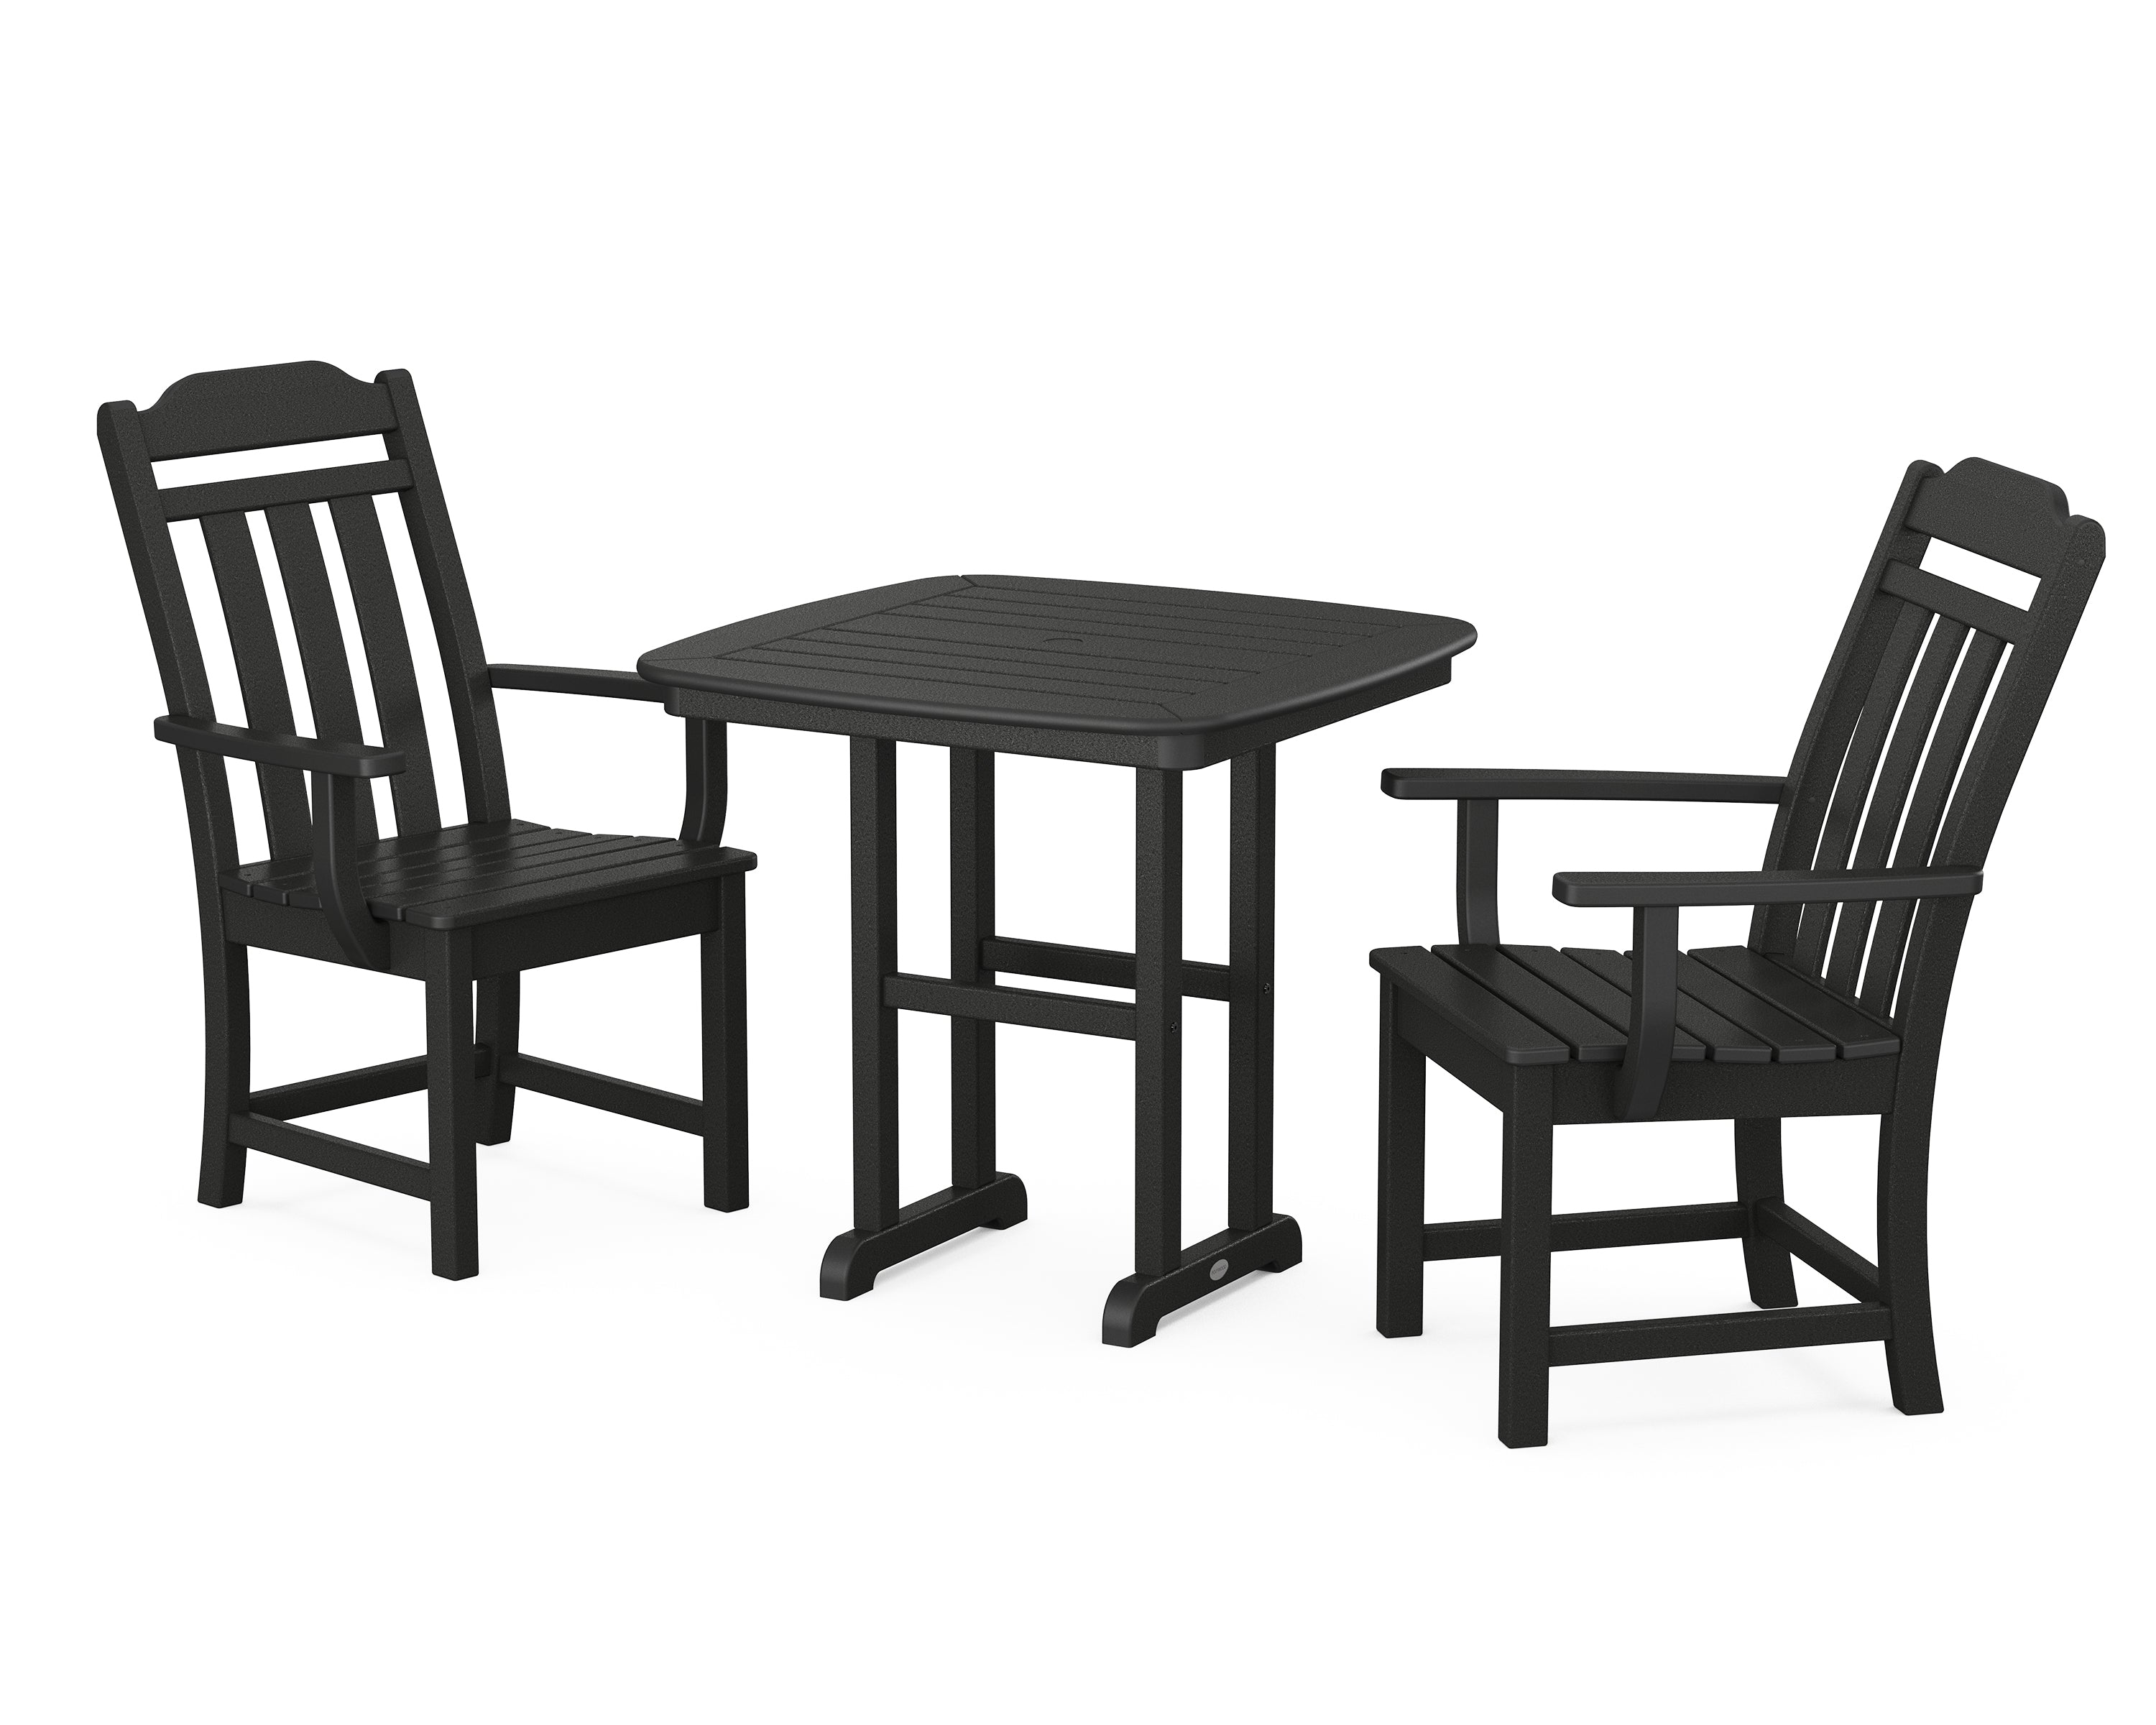 Polywood Country Living 3-Piece Dining Set in Black